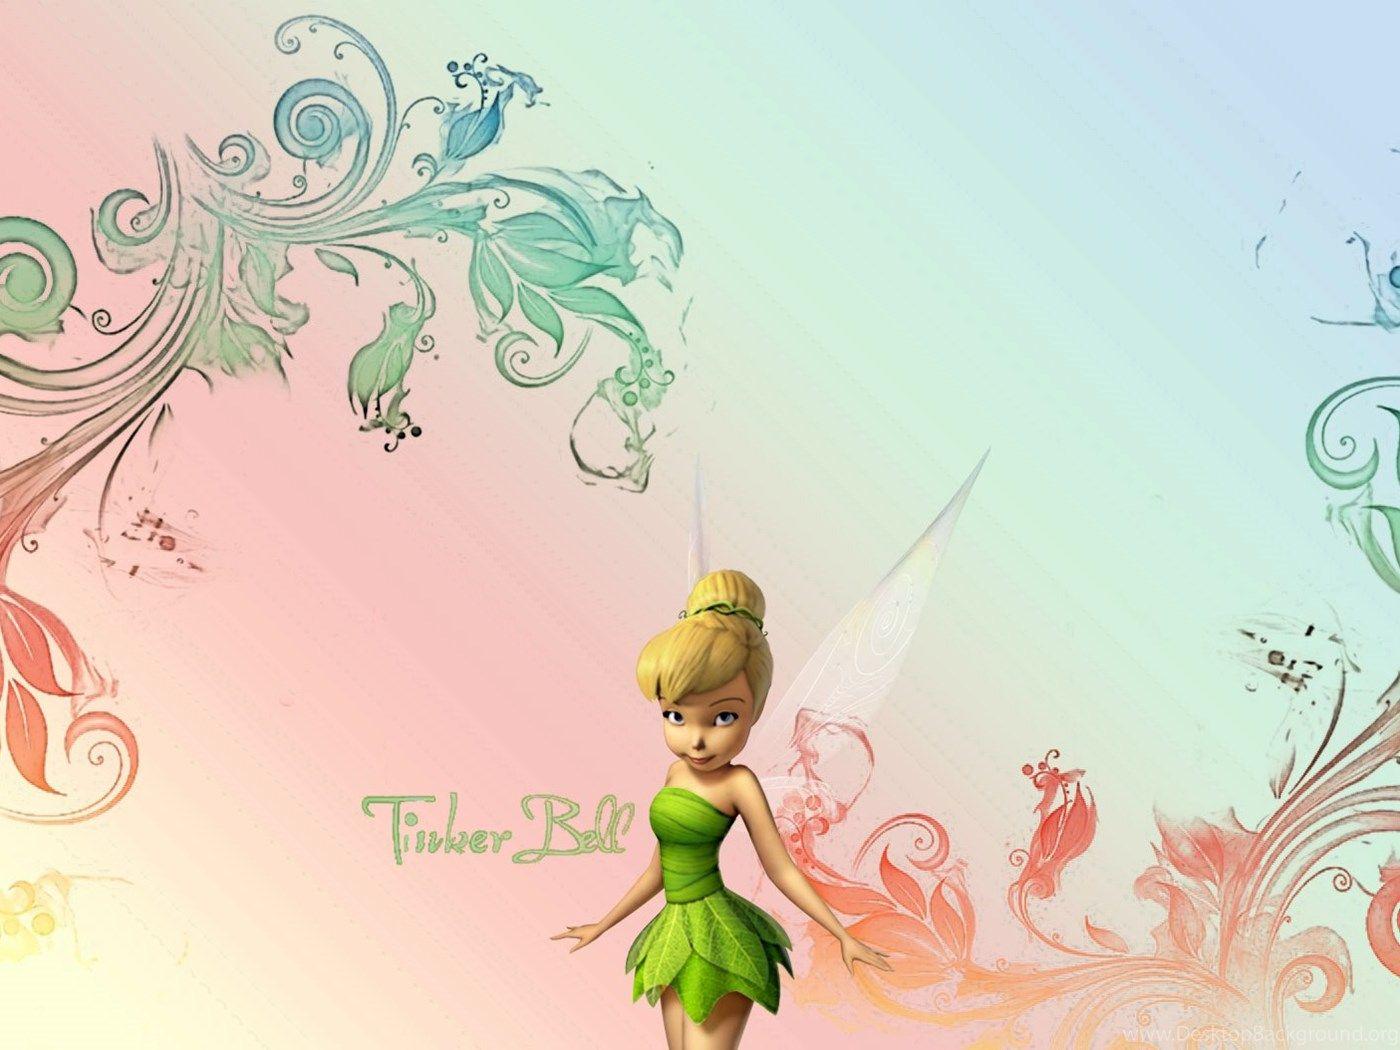 tinkerbell wallpaper for computers hd